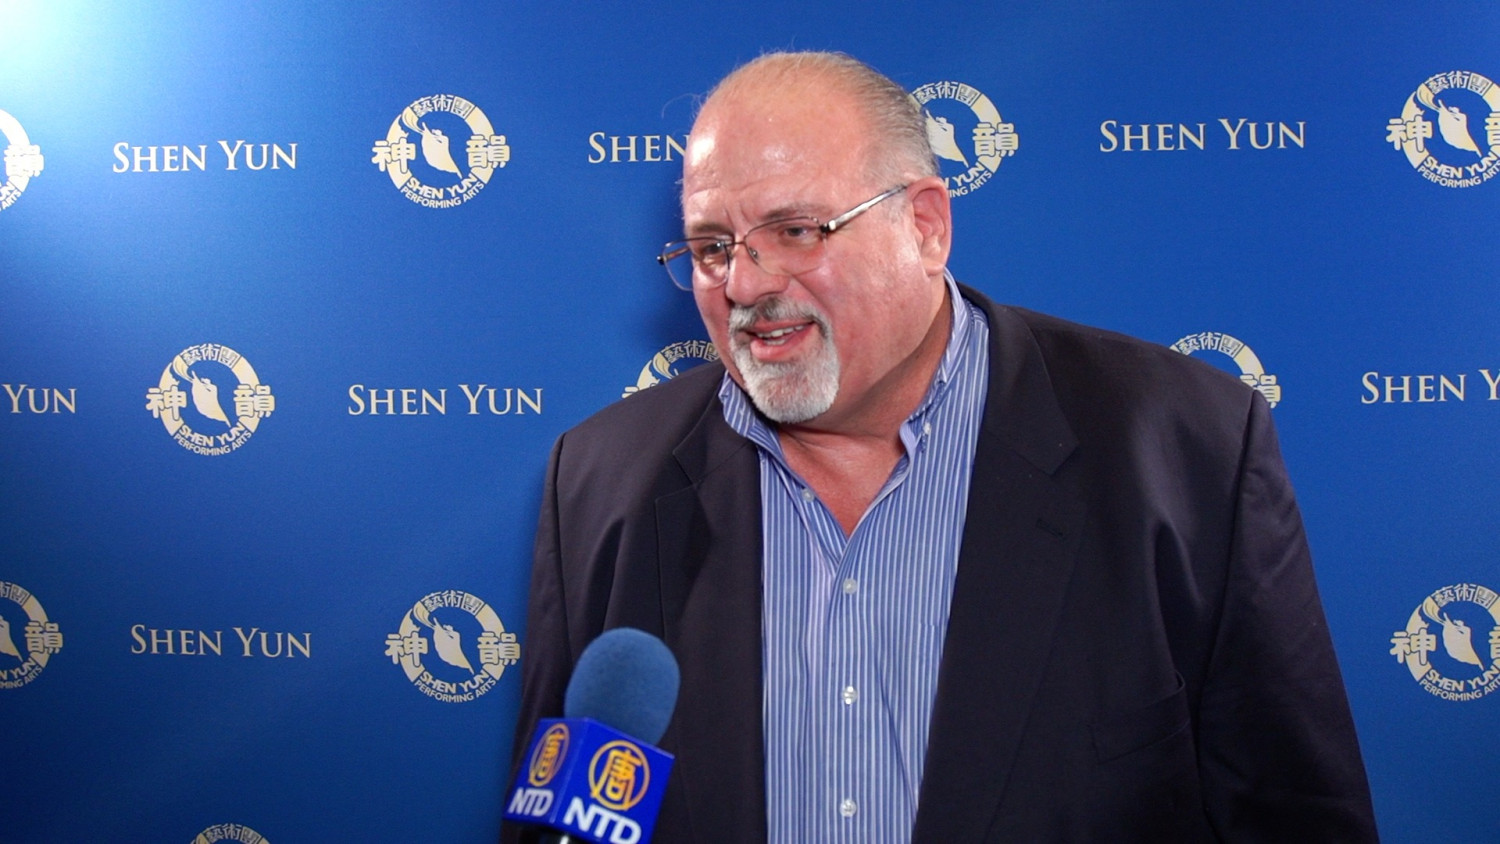 Executive Praises Shen Yun’s Mission: ‘That’s a Very Valiant Move and I Really Applaud Them for Doing That’